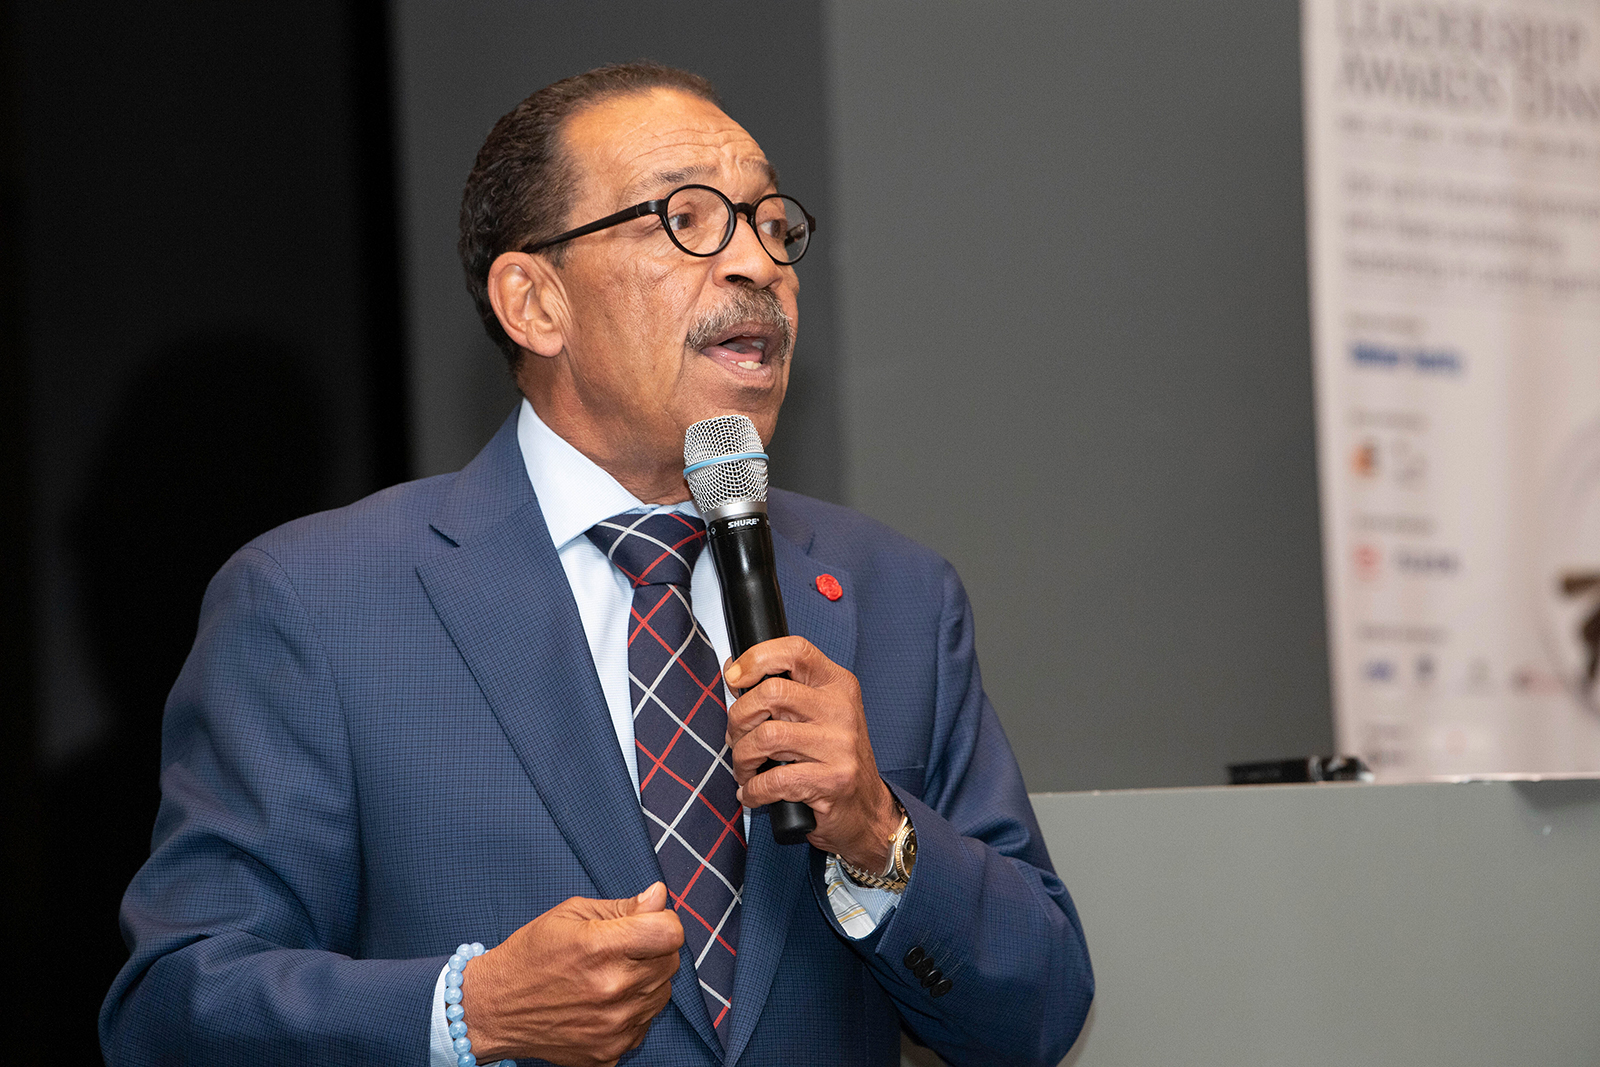 Los Angeles City Council Chairman, Herb Wesson Jr., speaks at the City Club in Los Angeles, December 3, 2019